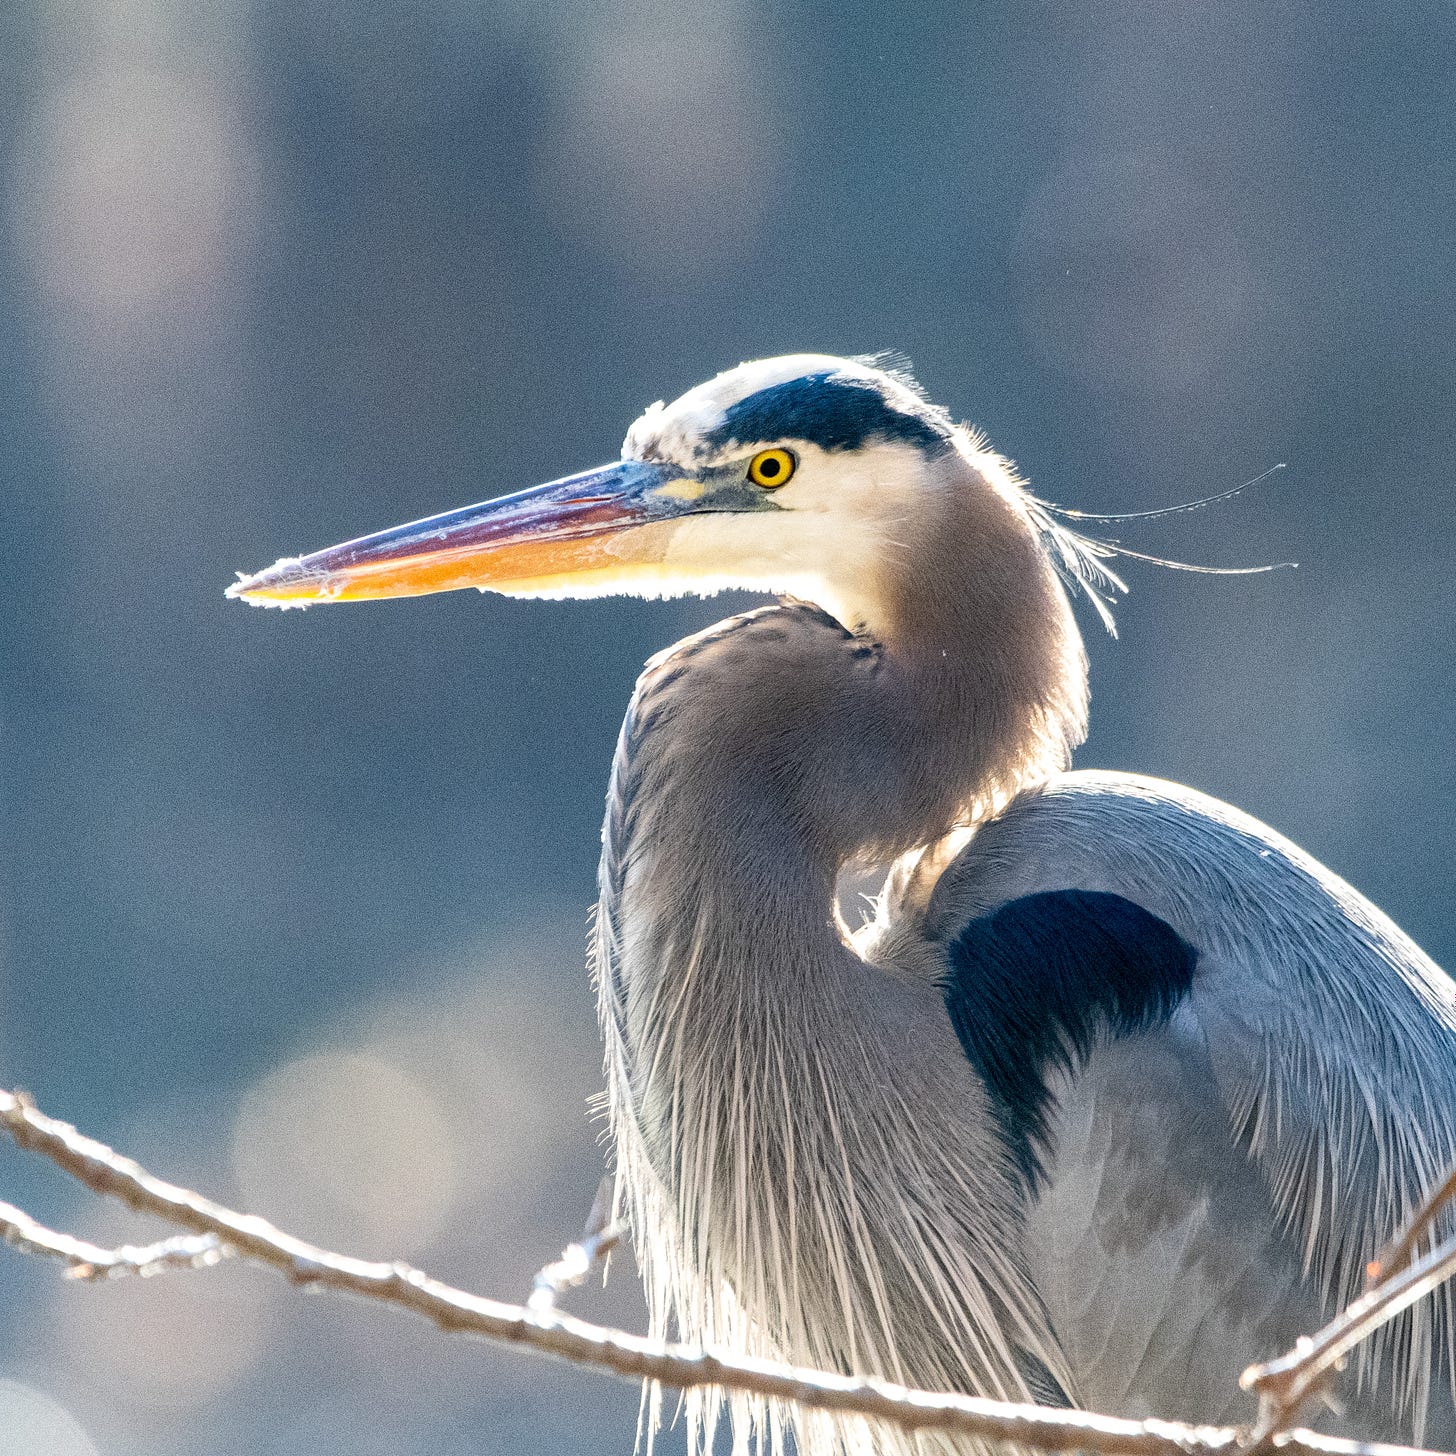 Close-up of a great blue heron in a stern mood but with its feathers somewhat frilly